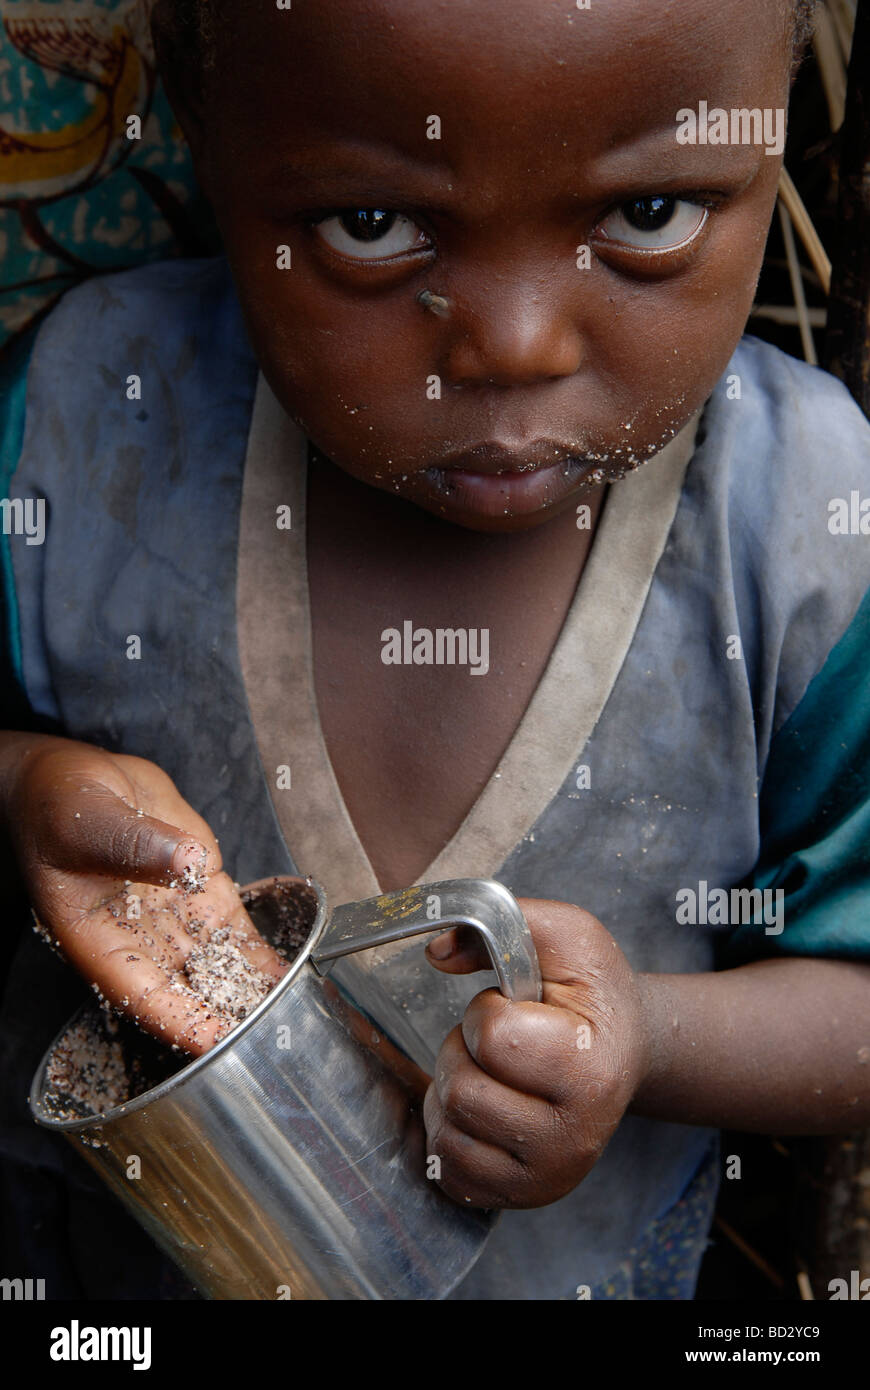 An Internally displaced child eating with his hand  in a makeshift IDP camp in North Kivu, DR Congo Africa Stock Photo